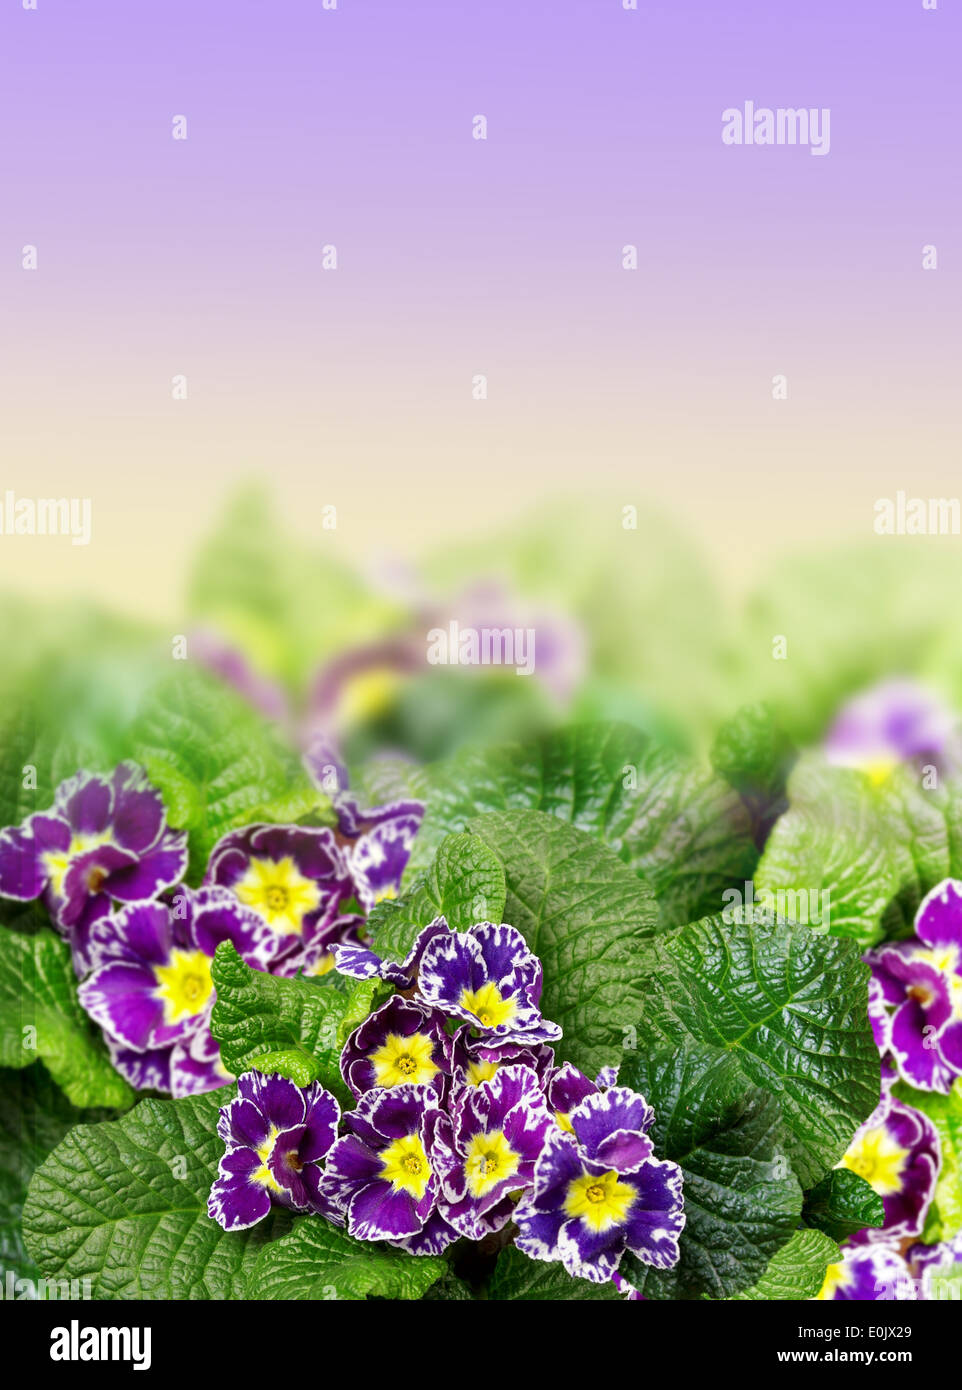 Floral Border with purple primel Stock Photo